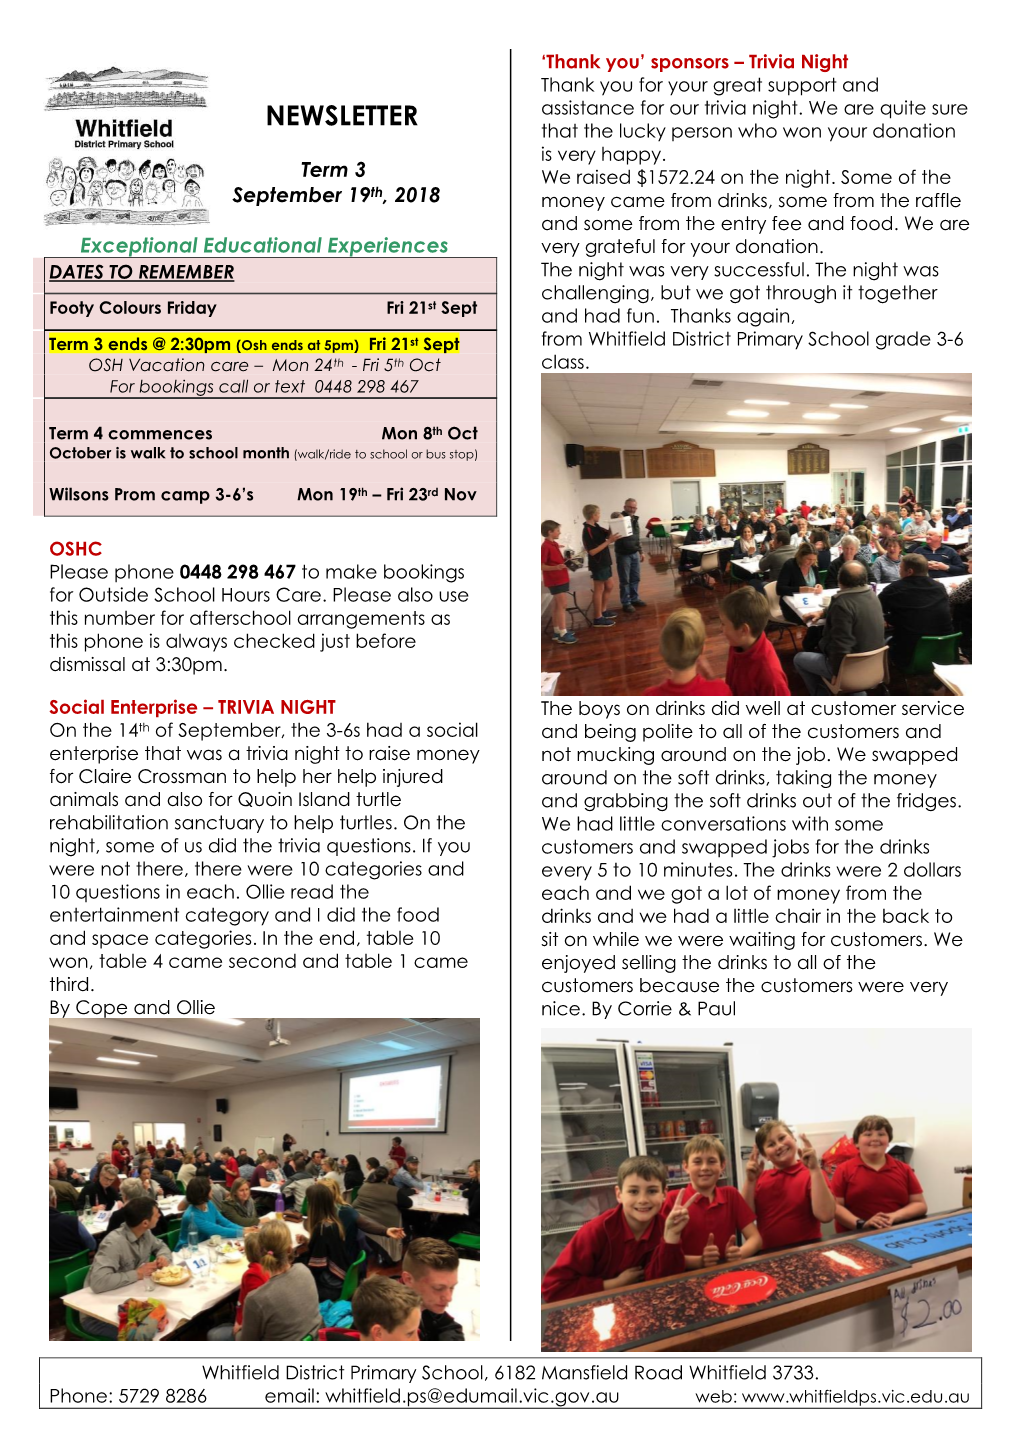 NEWSLETTER Assistance for Our Trivia Night